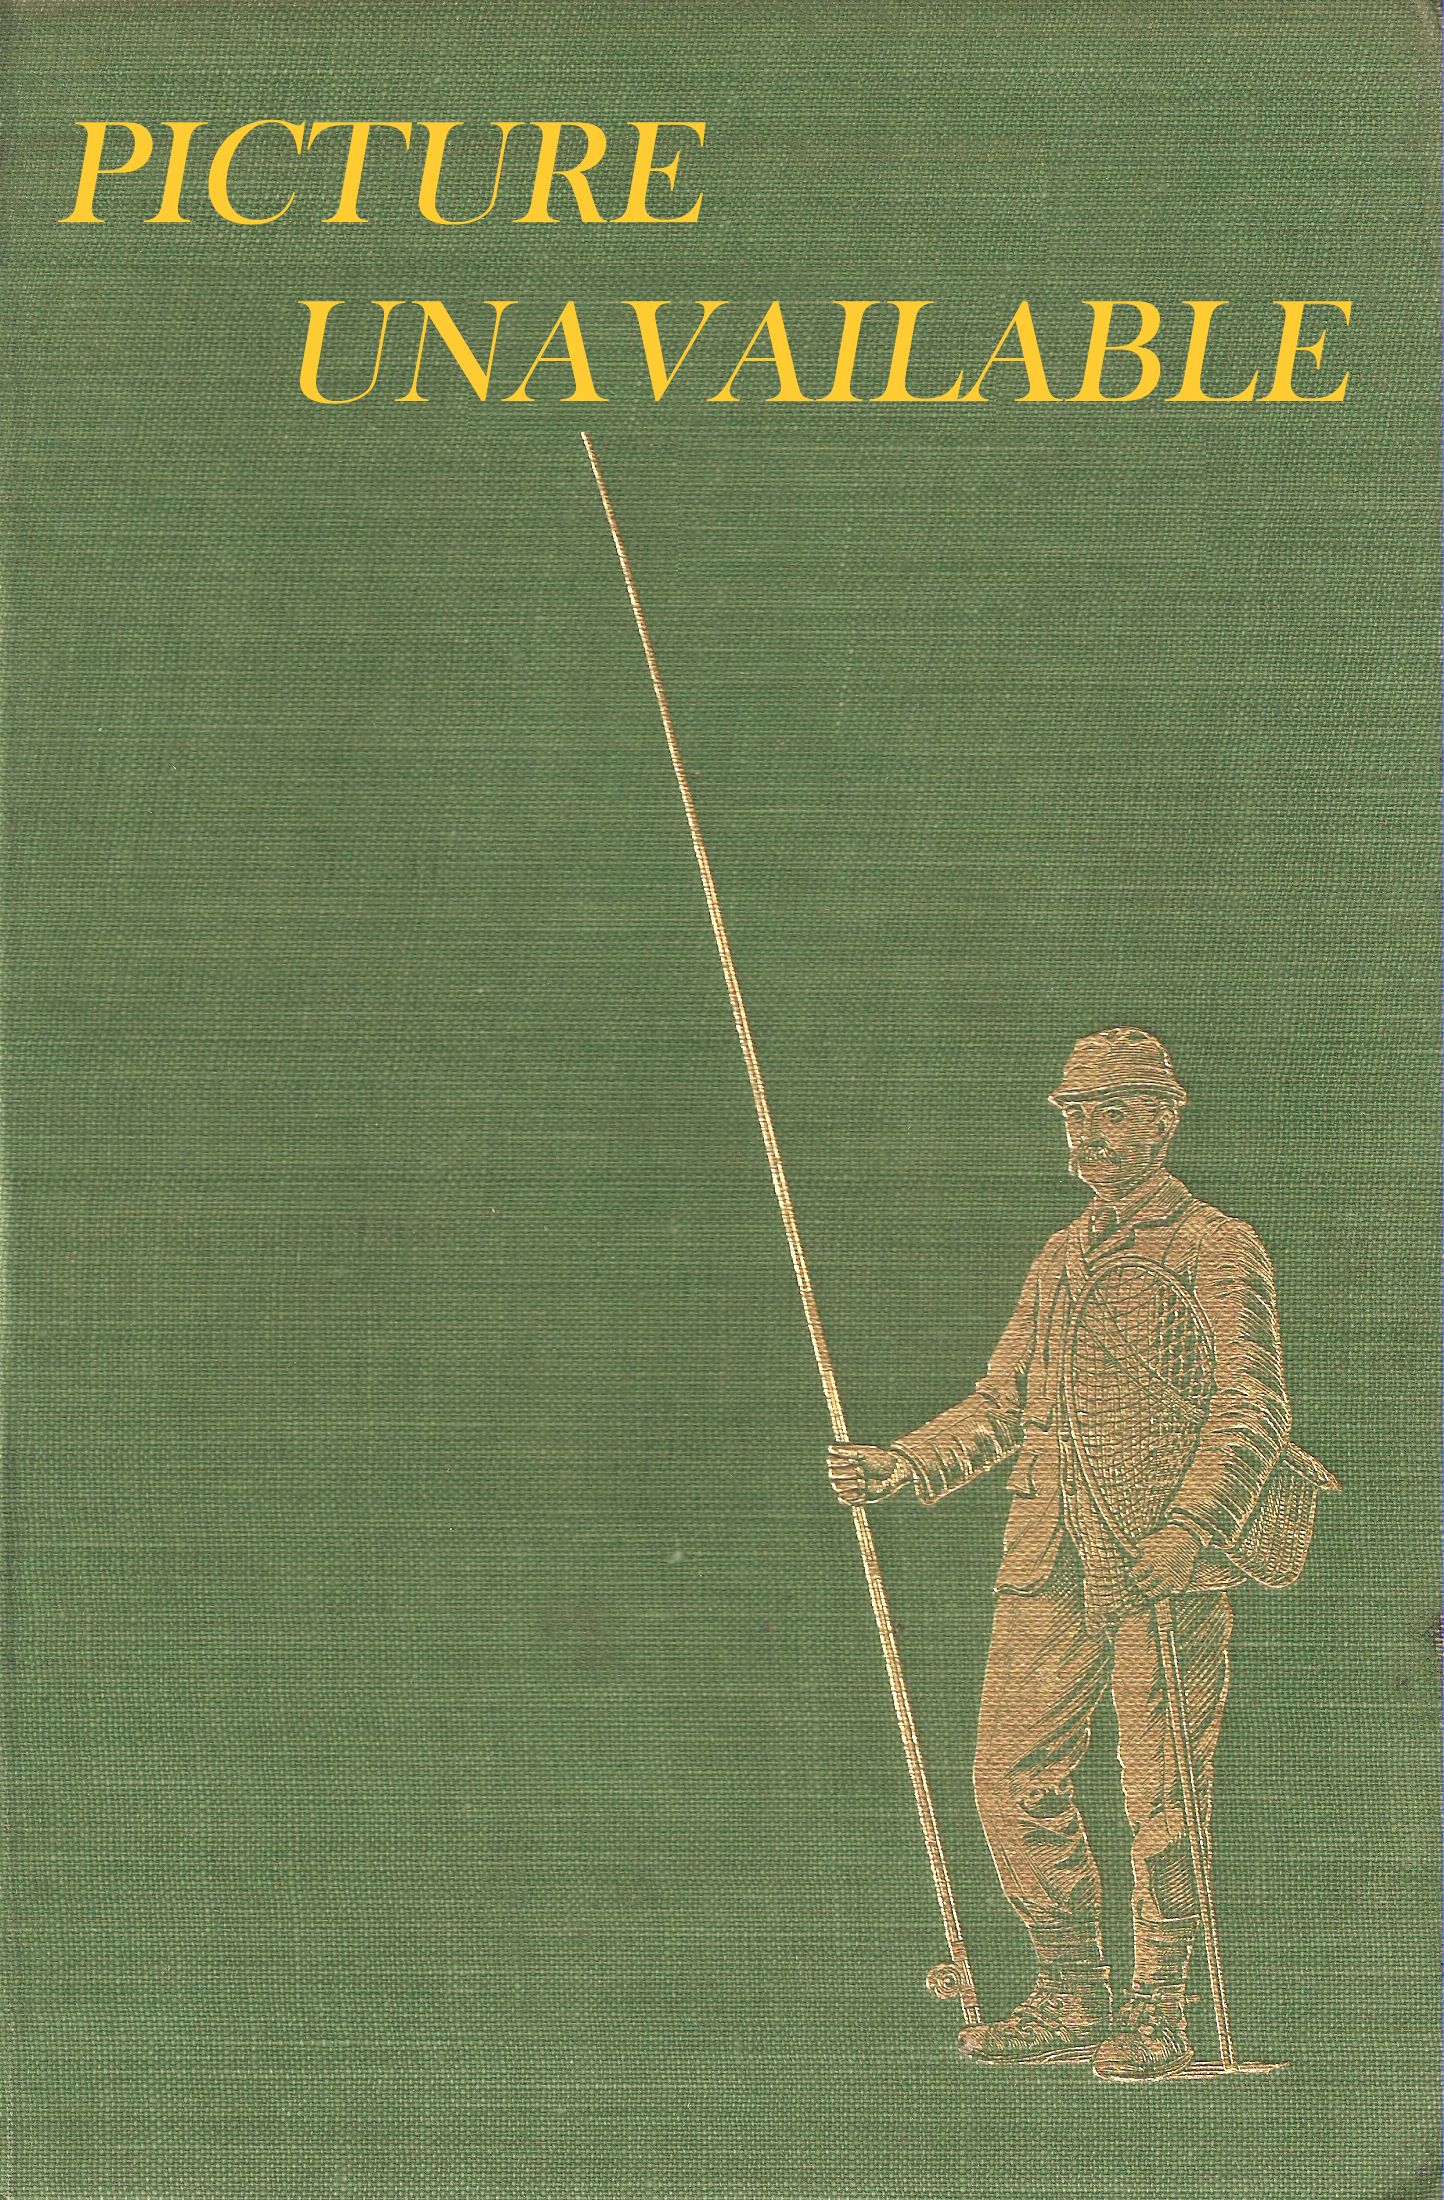 THE LONSDALE LIBRARY: SALMON FISHING. By Eric Taverner and Jock Scott.  With contributions by S. Drummond Sedgwick, Dr. D.H. Mills, A.H.E. Wood,  G.M. La Branche, W.J.M. Menzies and Dr. R.R. Taylor, Q.C.